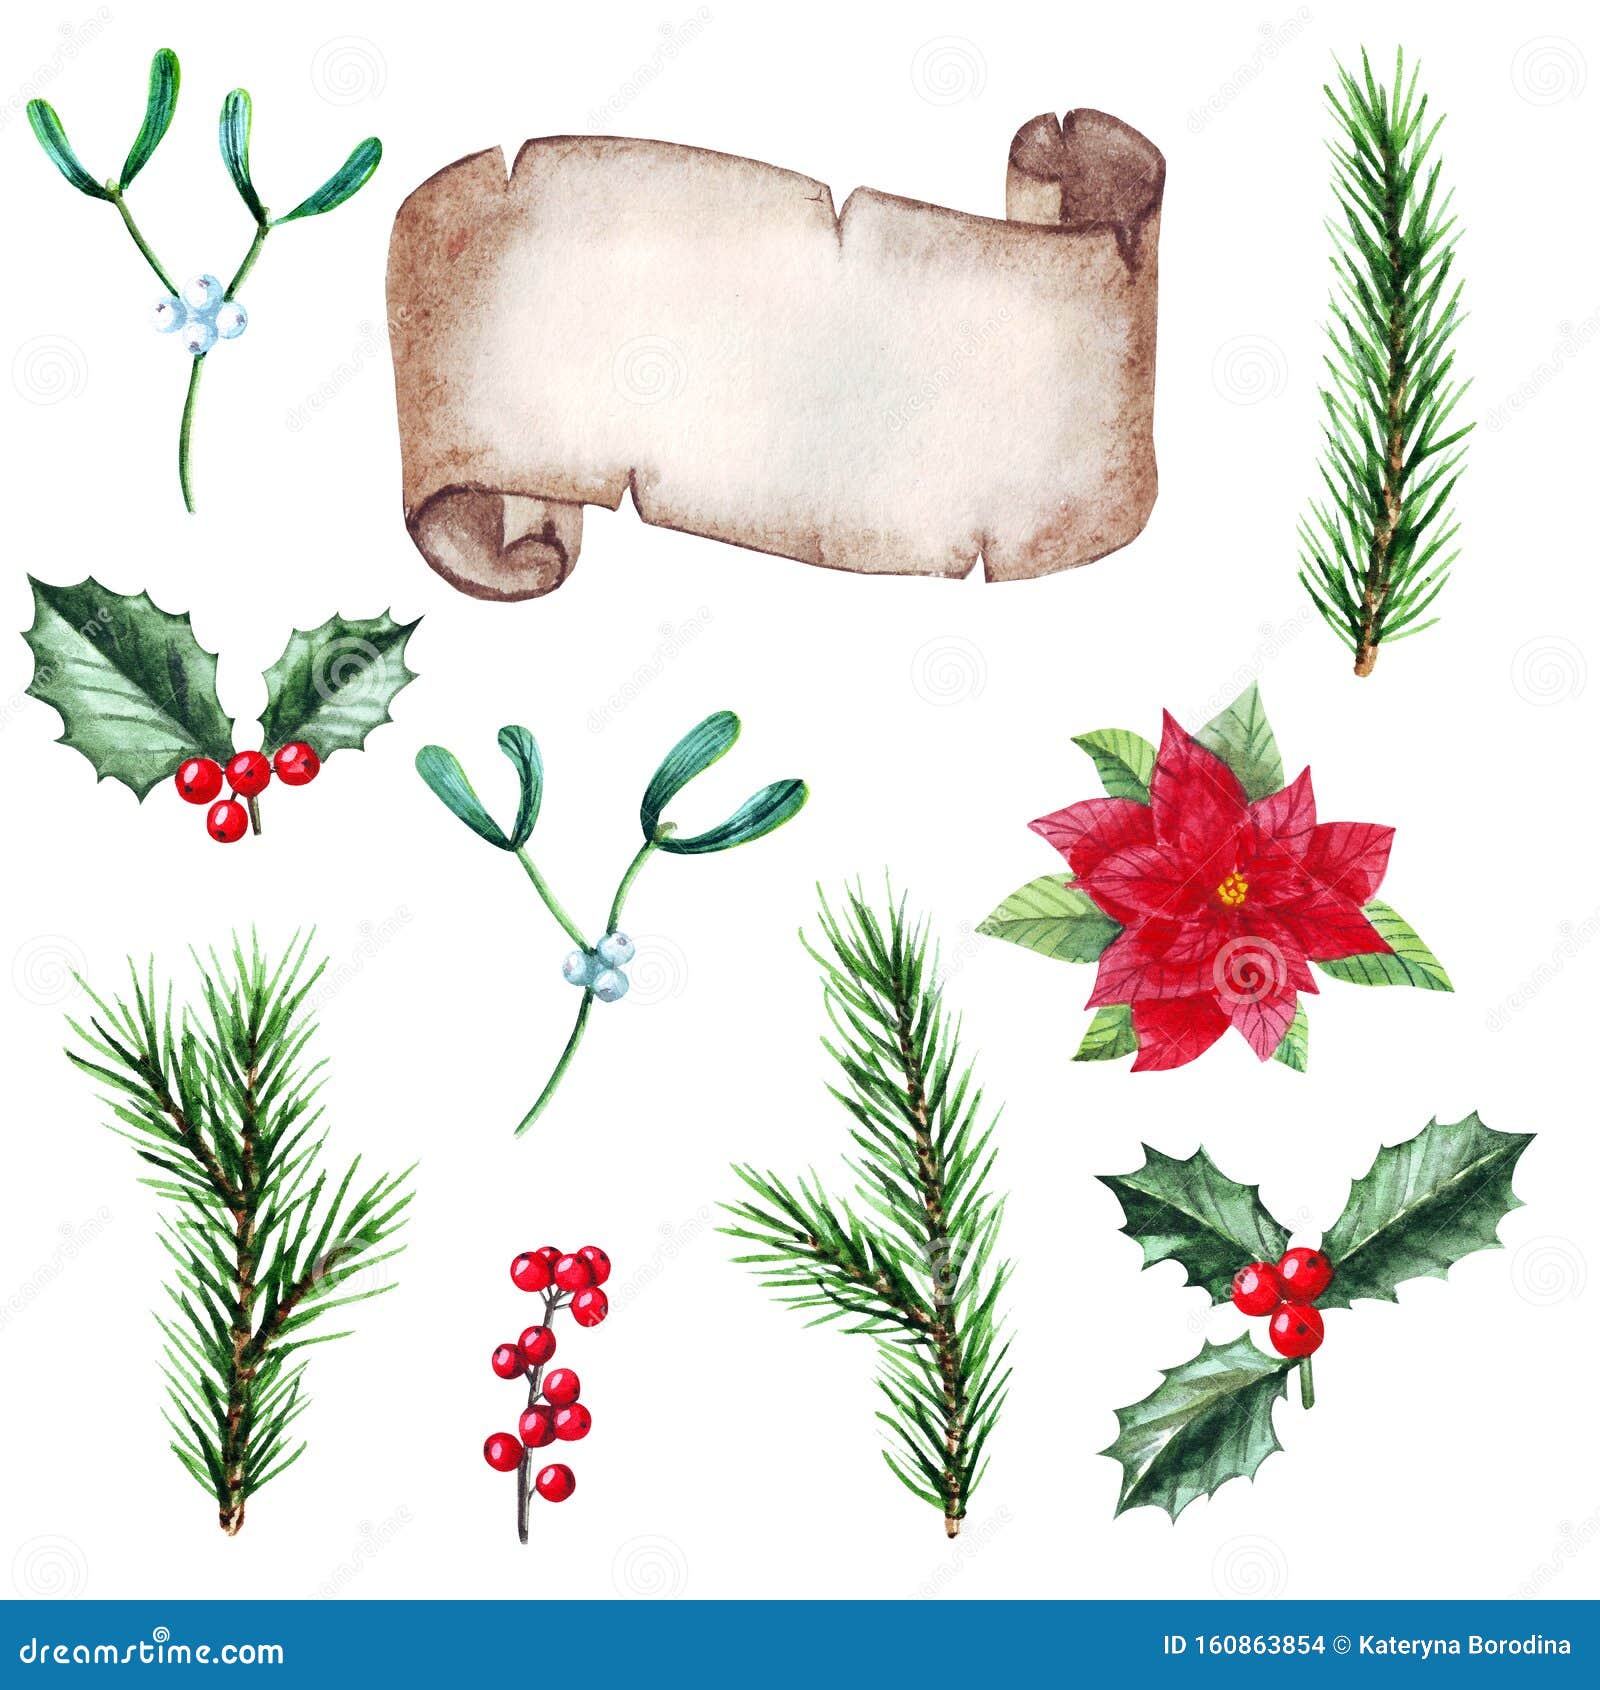 watercolor set of christmas decorations, cozy s, evergreen coniferous tree branches, berries and leaves, scroll